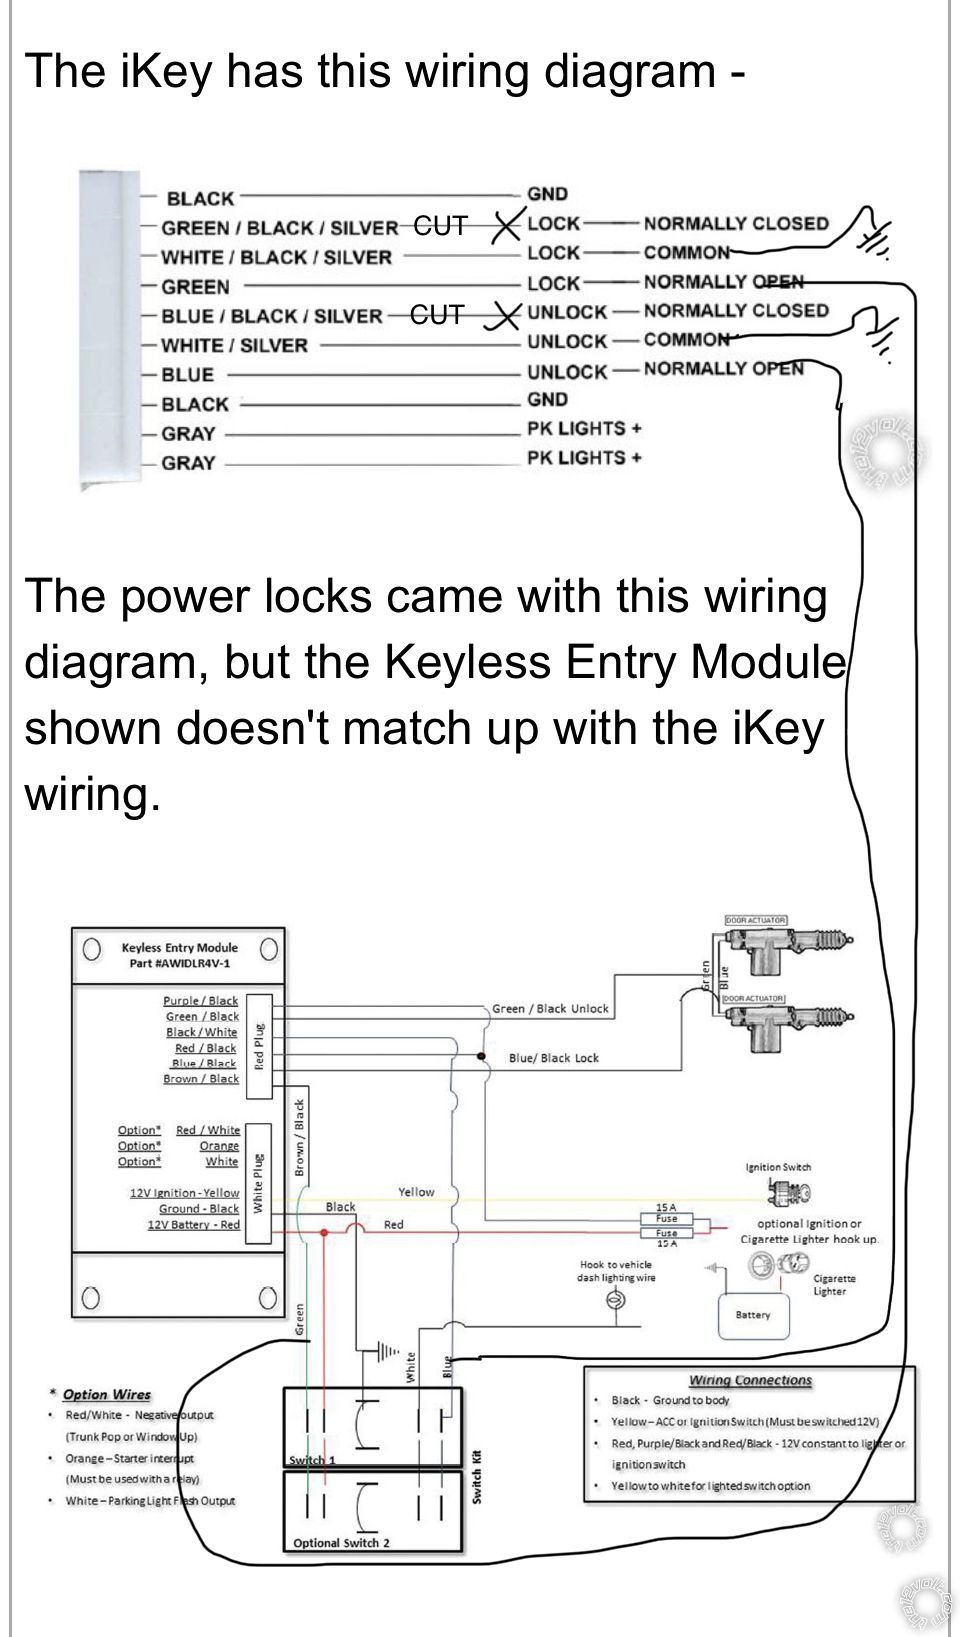 Keyless Entry Wiring, 1965 Ford Mustang Resto-Mod -- posted image.